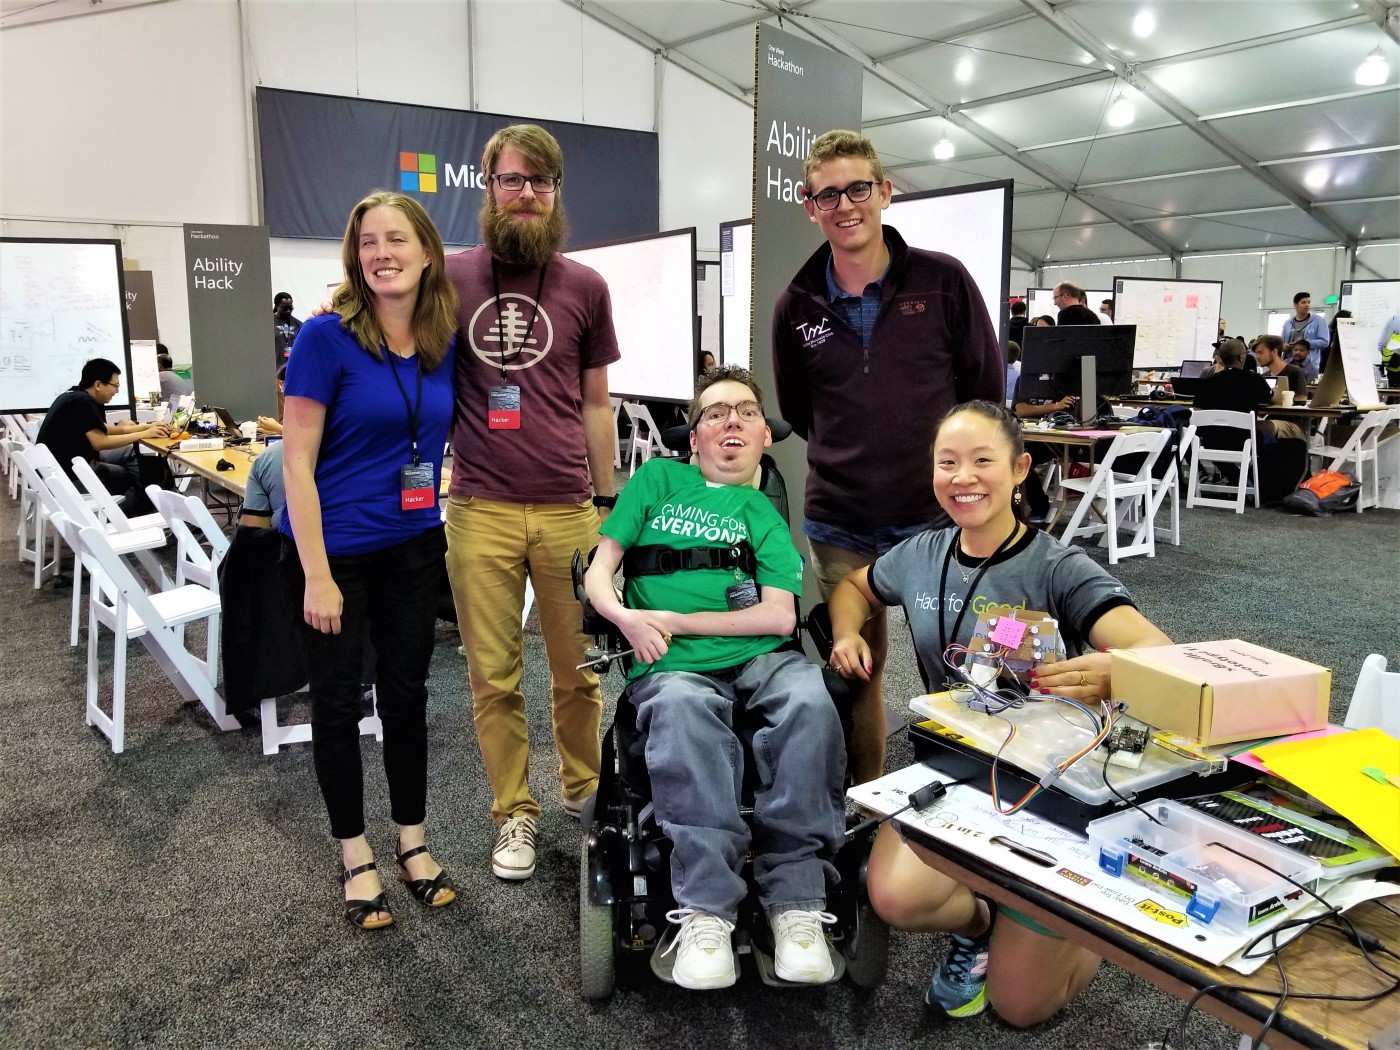 Photograph of five people at the hackathon event